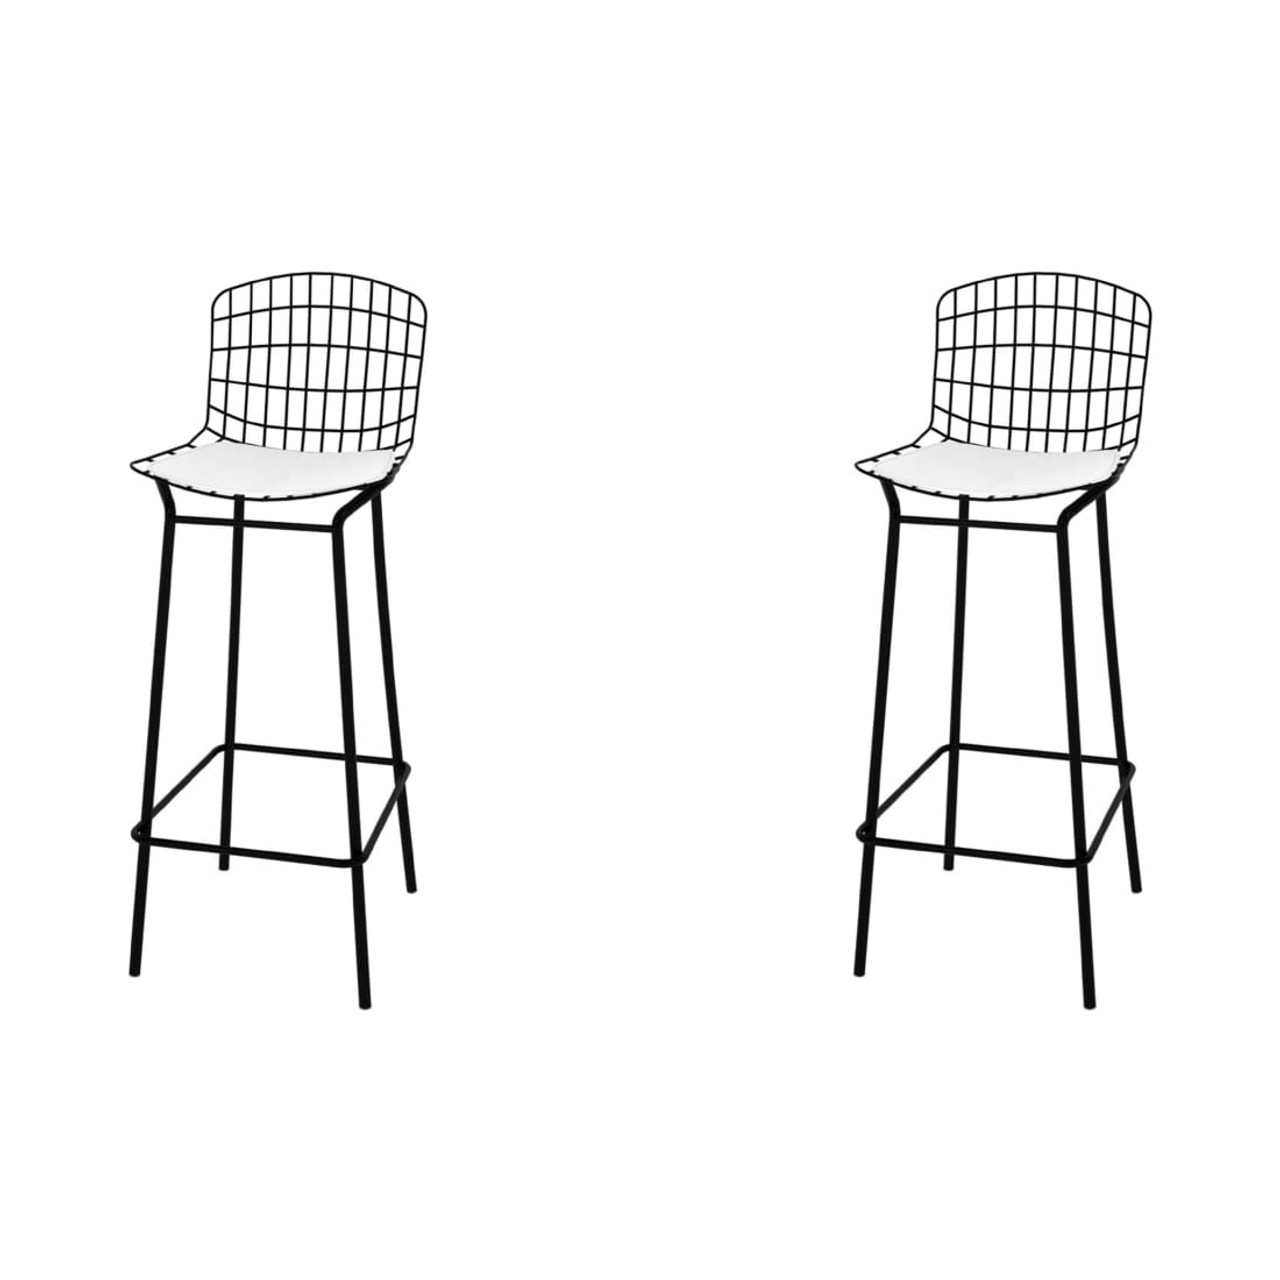 Holguin Barstool in Gray, Black and Gold